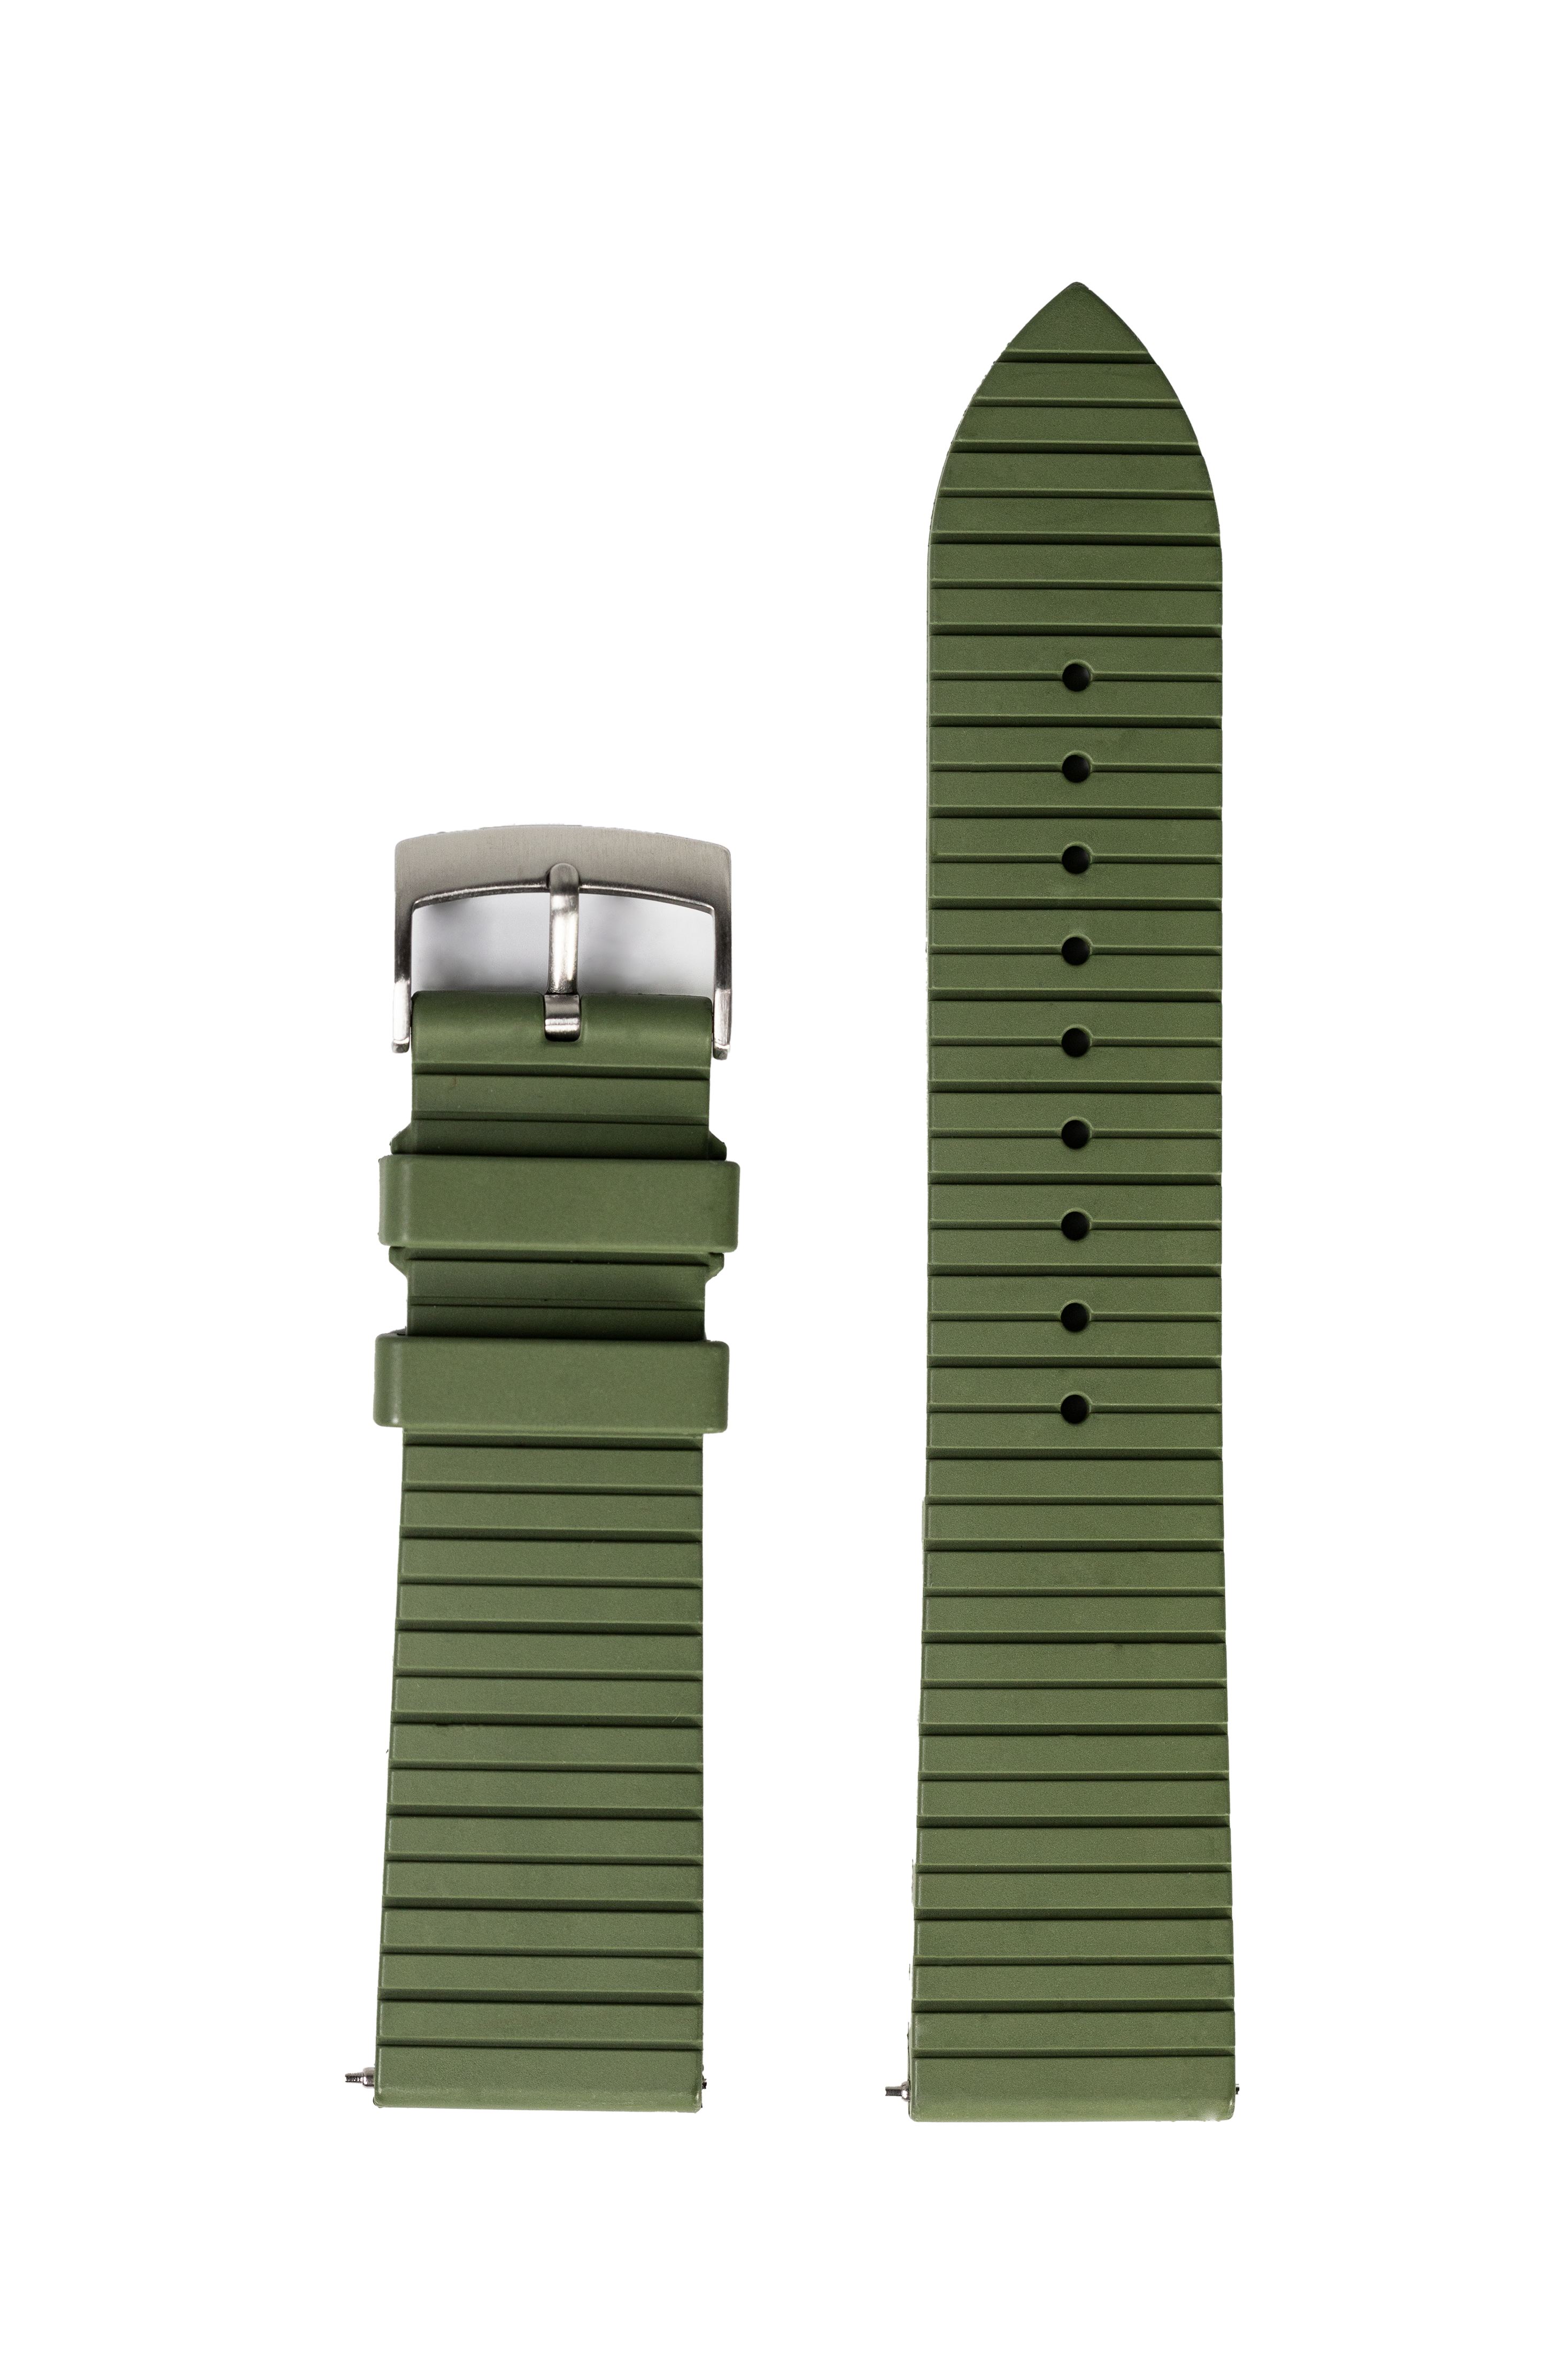 [Quick Release] King Panelarc FKM Rubber - Army Green